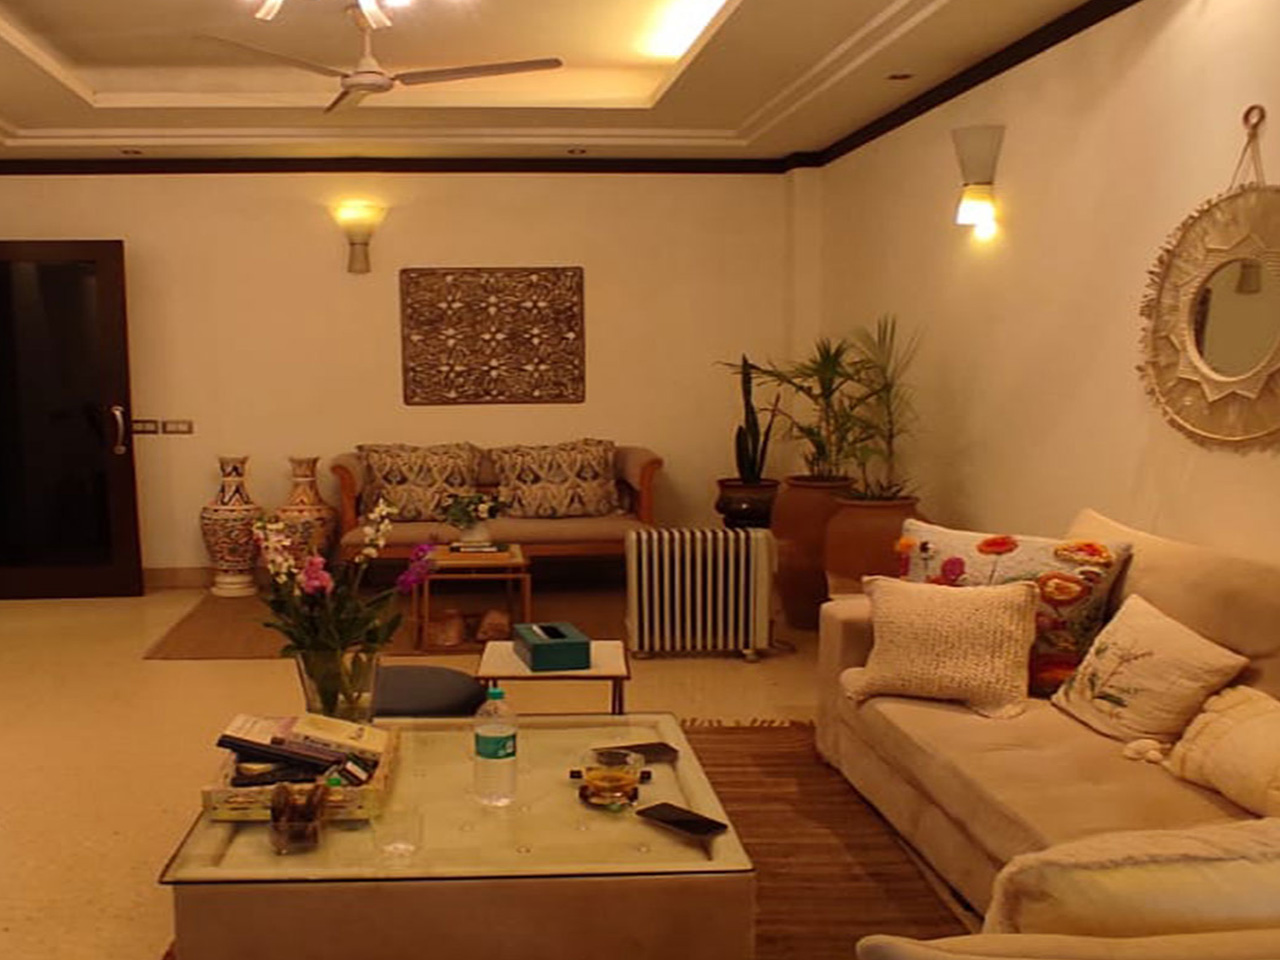 1,2,3 BHK Flate Sale defence colony Delhi